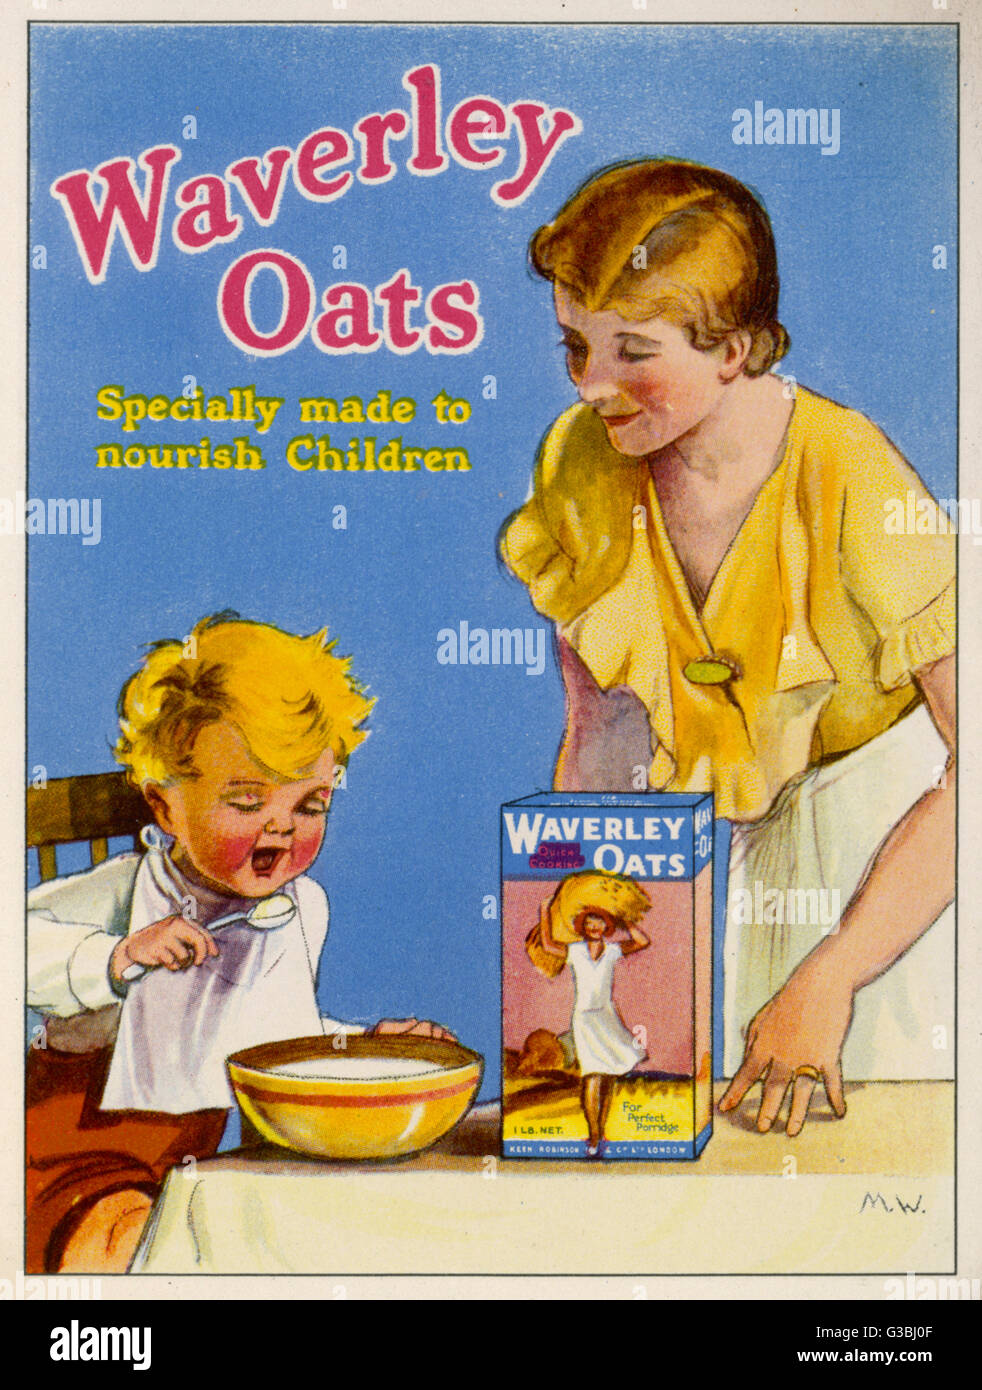 A young boy eats his way  through a huge bowlful of  WAVERLEY OATS - and no wonder  he's enthusiastic, for they are specially made to nourish  Children !     Date: 1930s Stock Photo